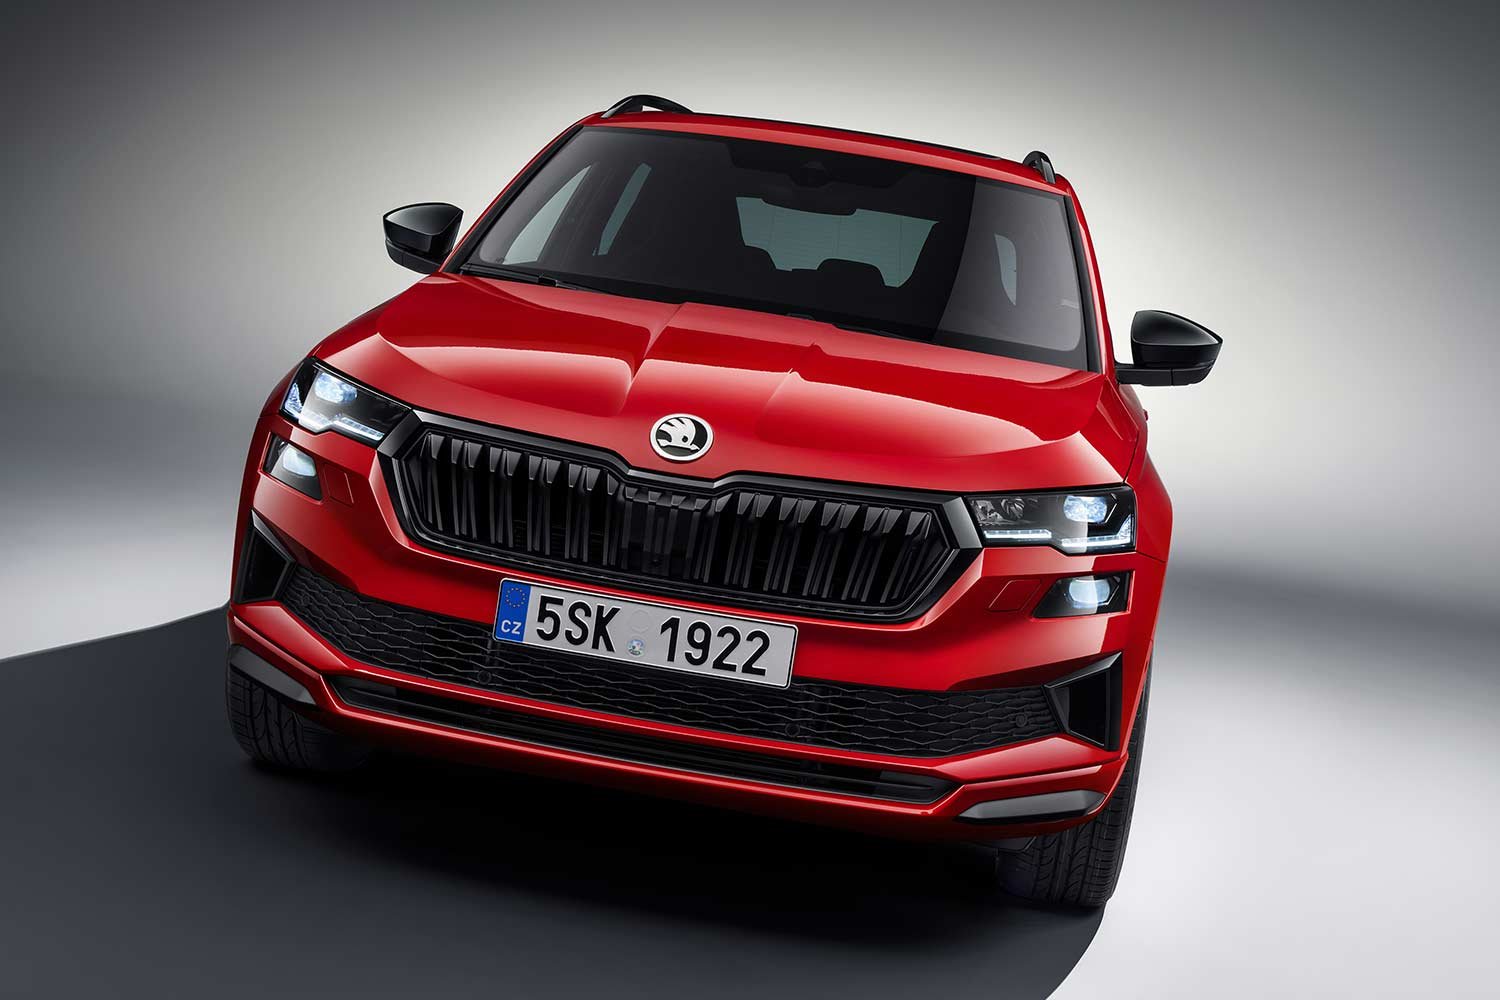 2022 Skoda Karoq facelift unveiled with a refined design